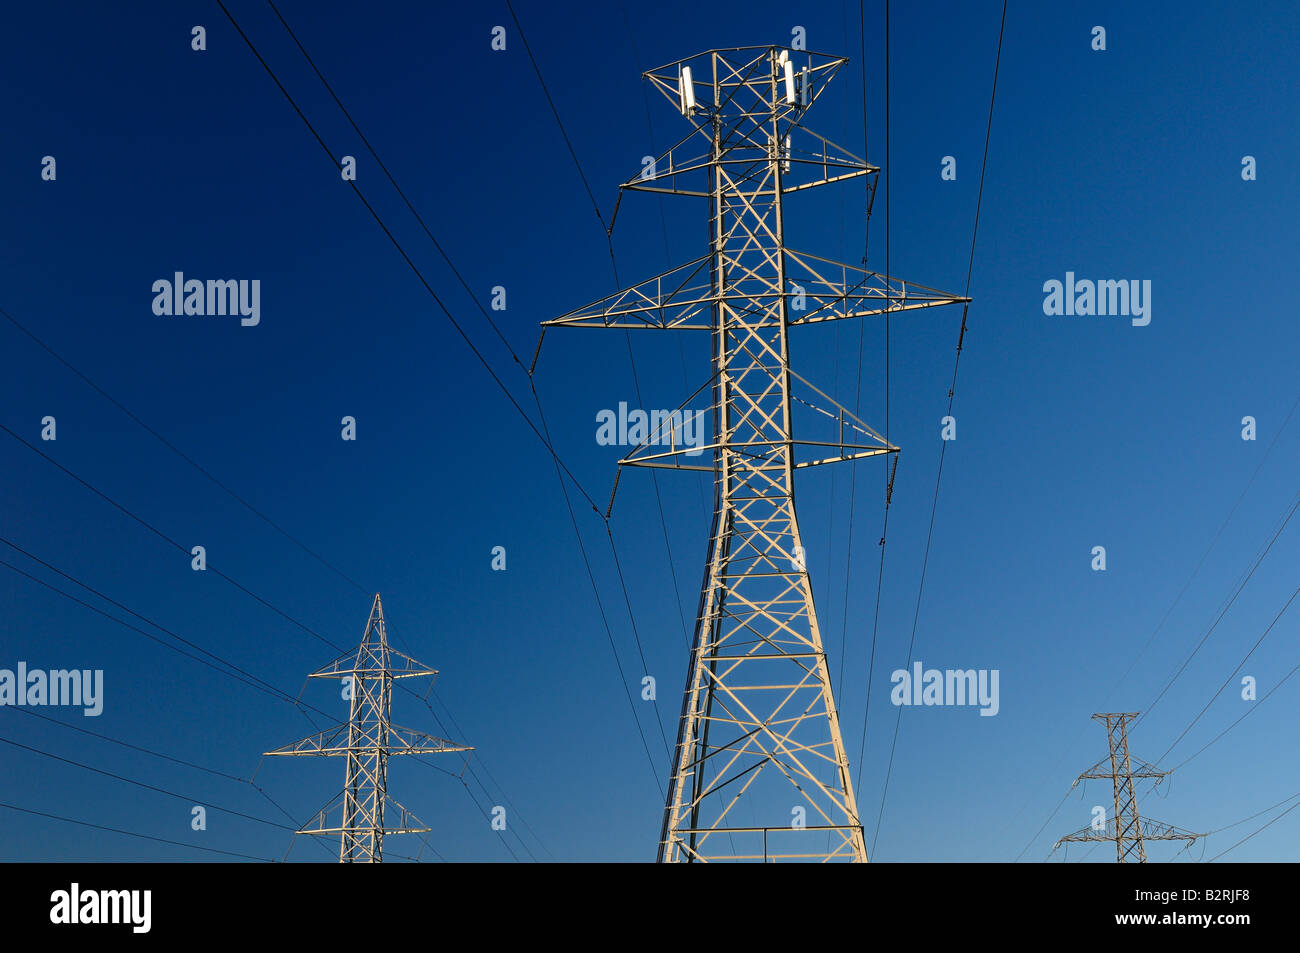 Cell phone telecommunication transmitters on one of three steel frame hydro towers against a blue sky Toronto Stock Photo